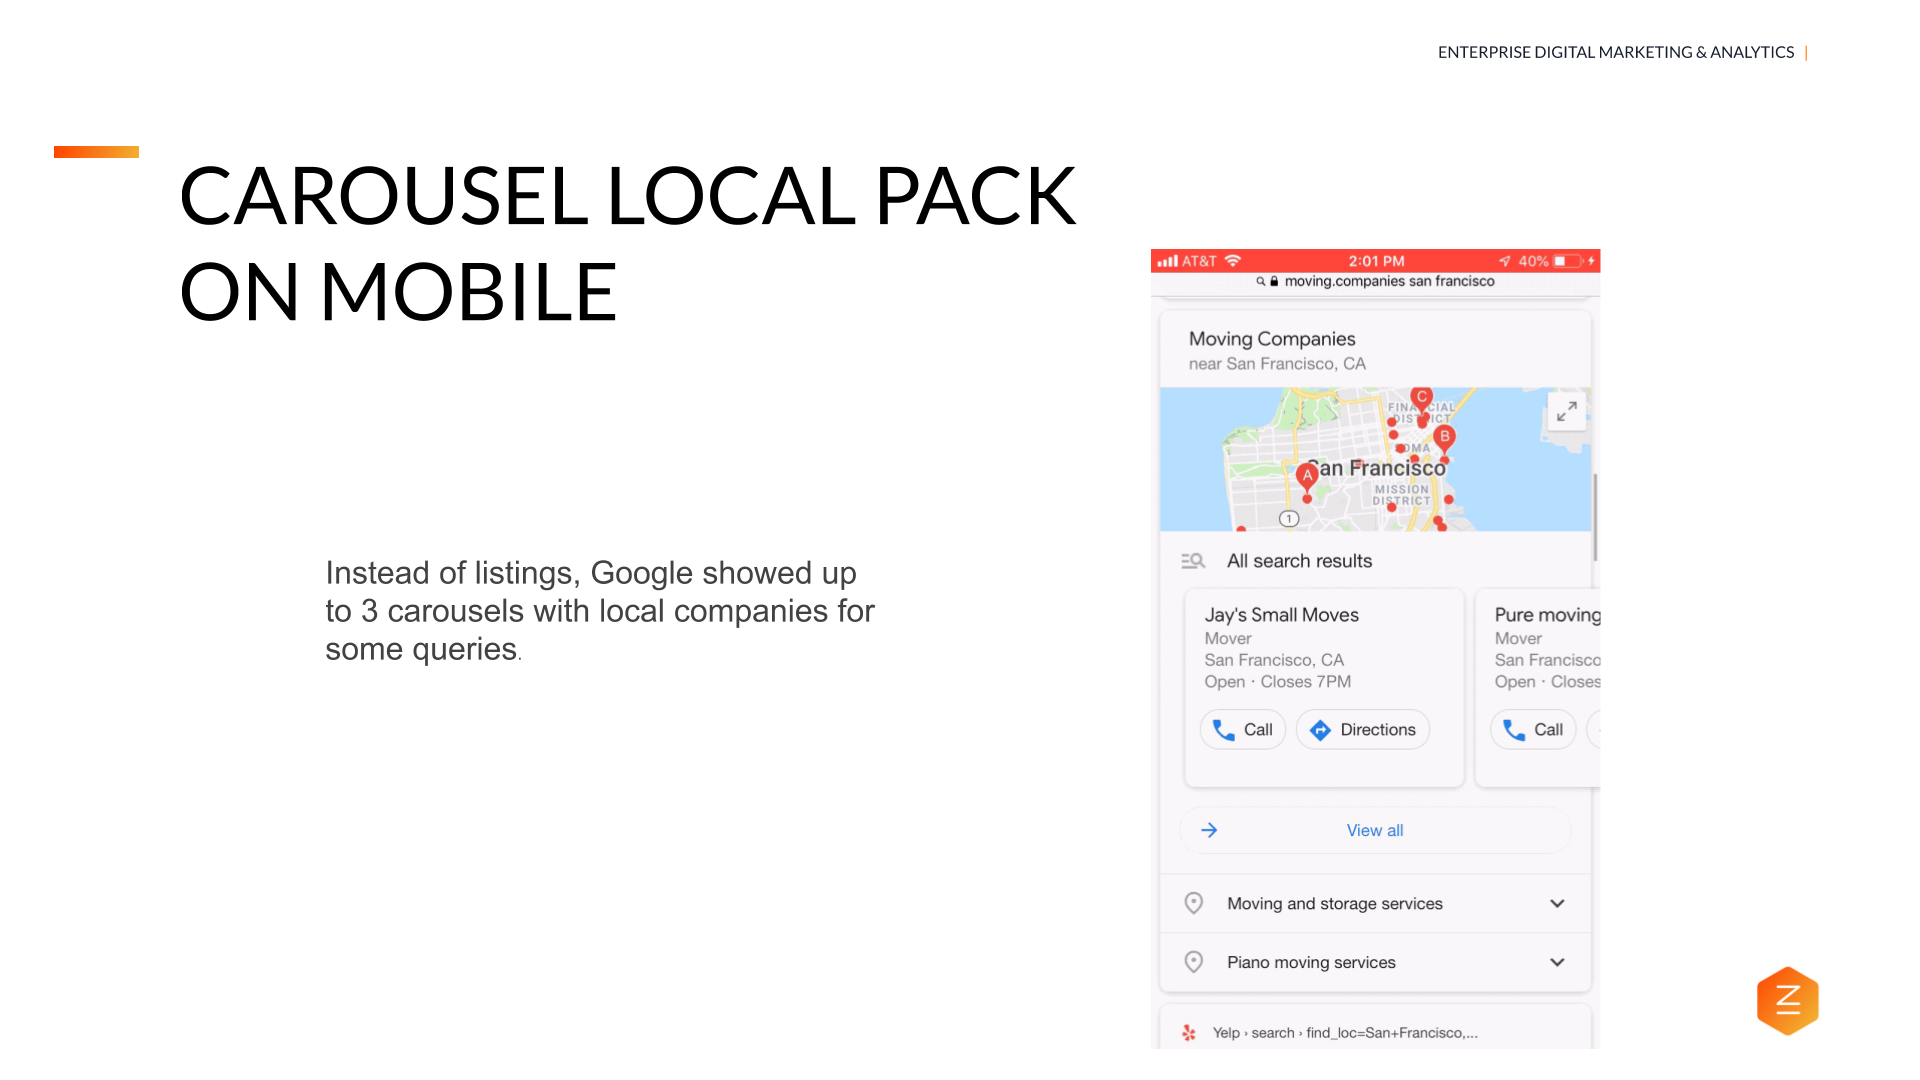 How to Grow Your Startup - Google Marketing Platform - Carousel Local Pack on Mobile